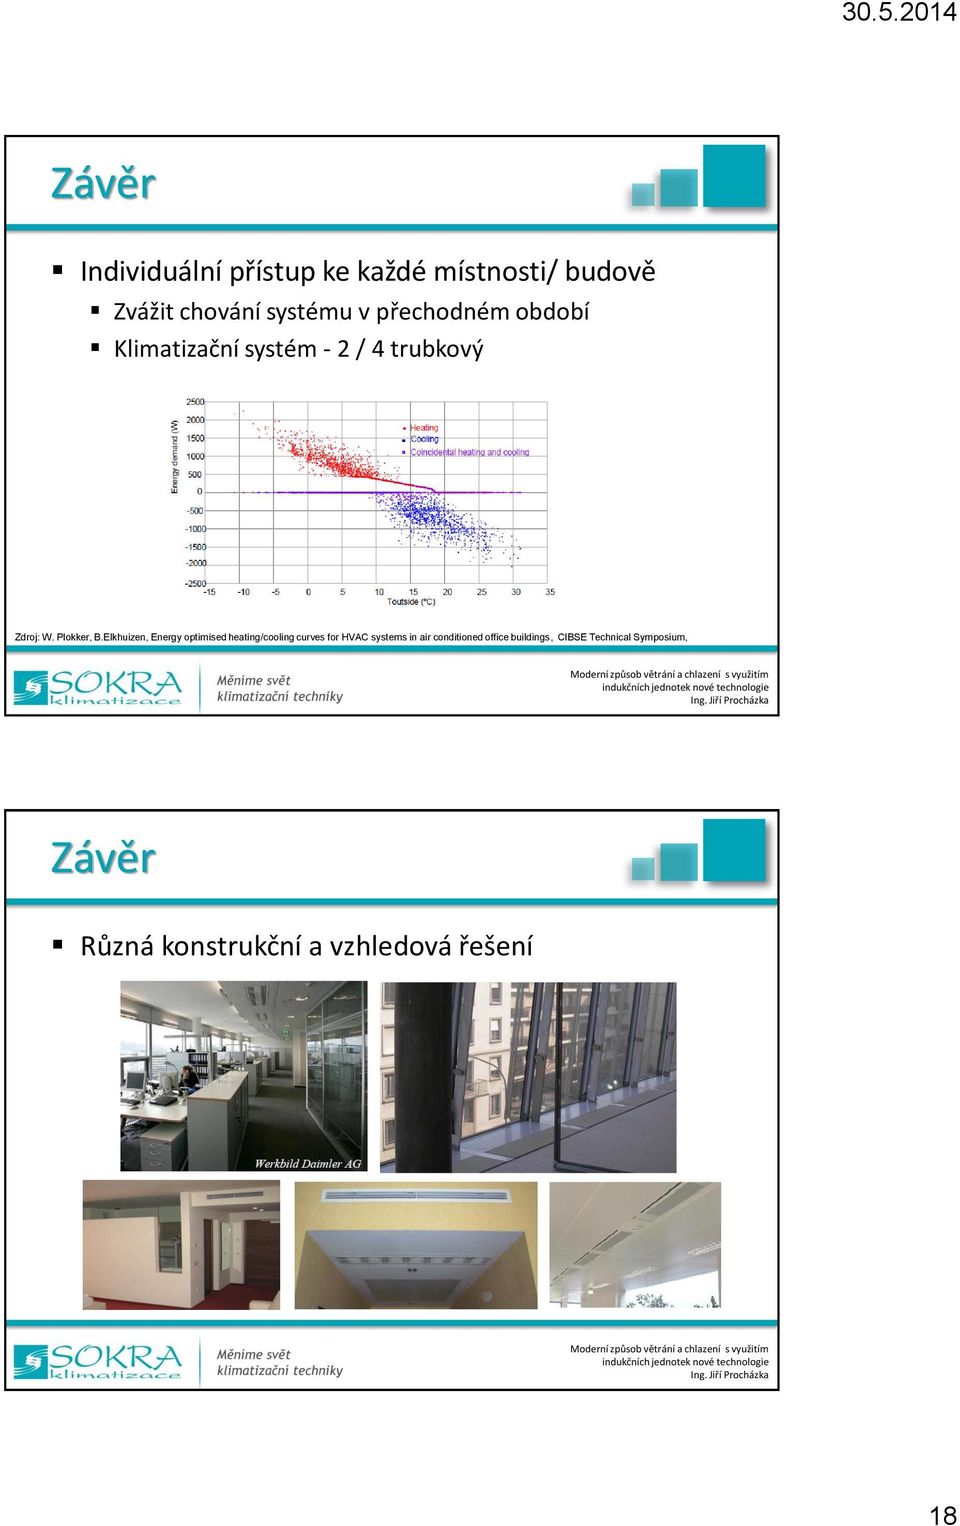 Elkhuizen, Energy optimised heating/cooling curves for HVAC systems in air